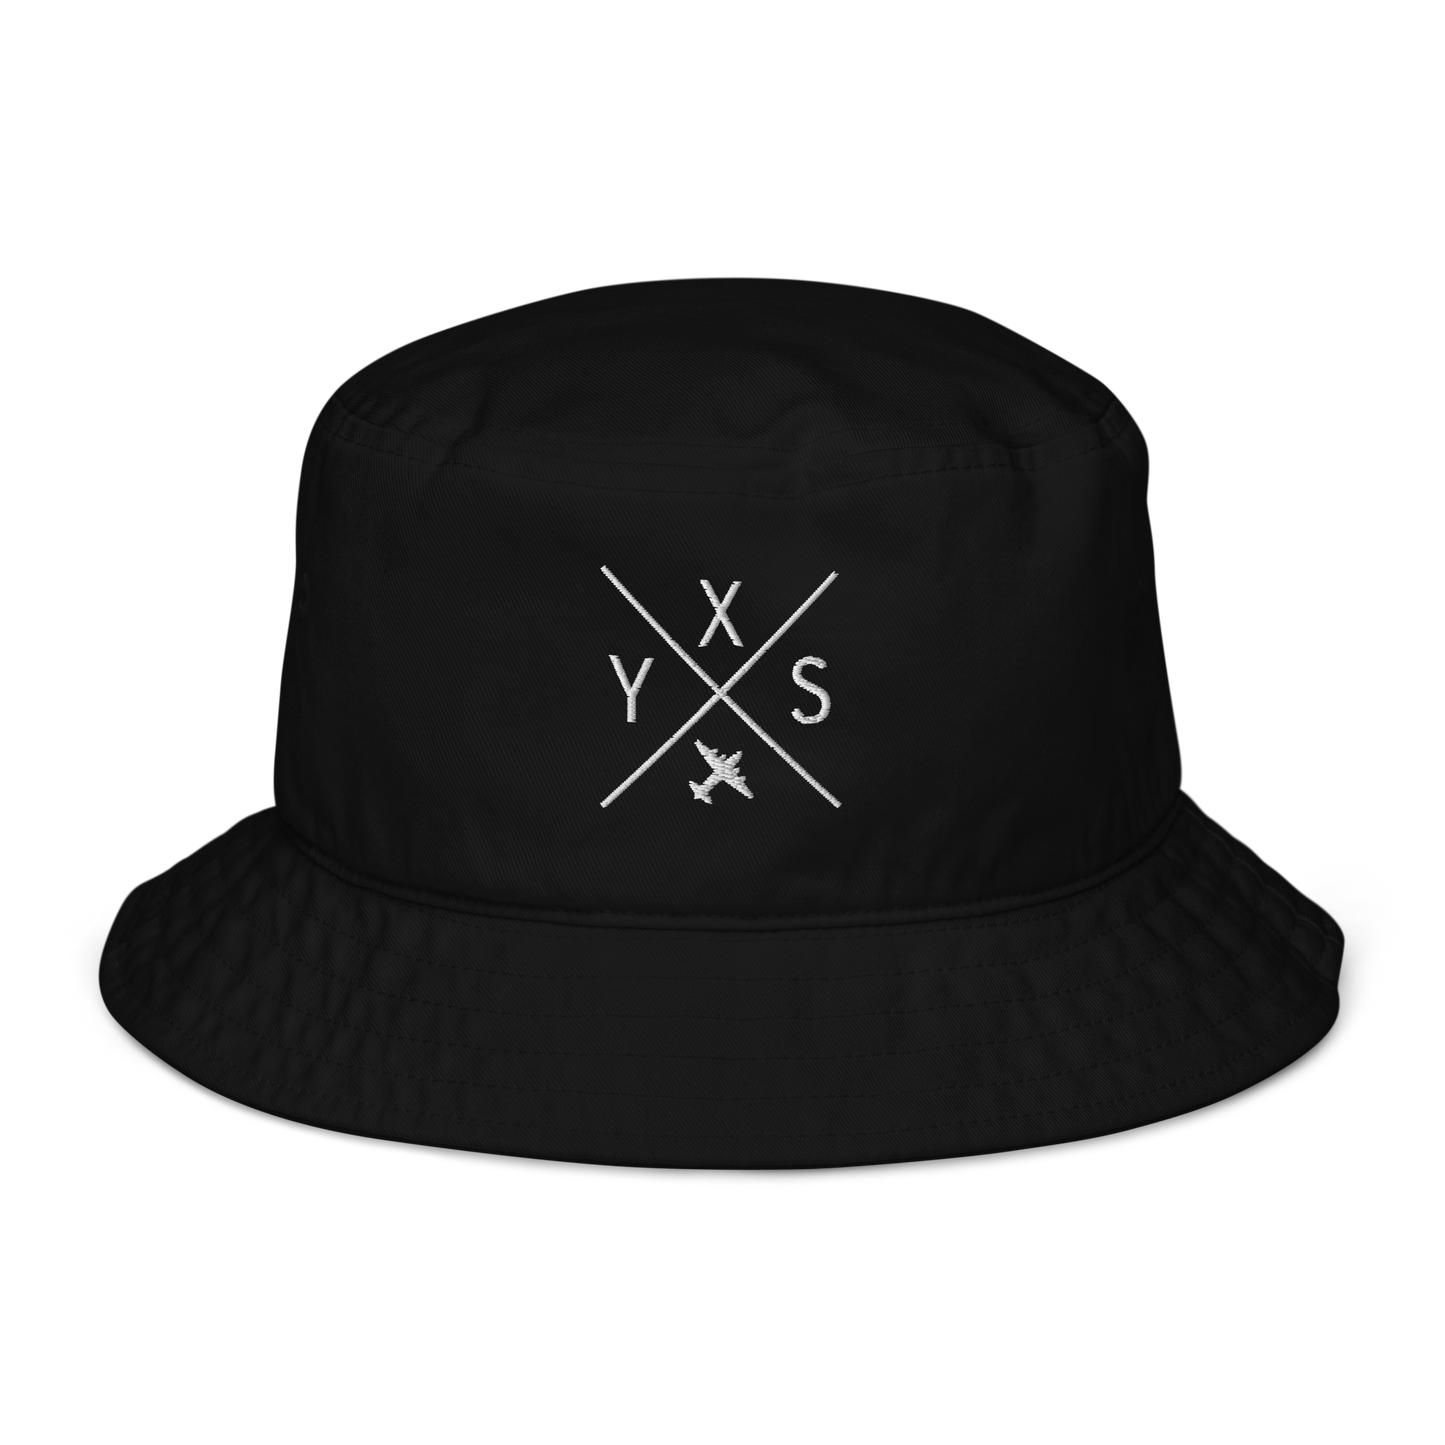 YHM Designs - YXU London Organic Cotton Bucket Hat - Crossed-X Design with Airport Code and Vintage Propliner - White Embroidery - Image 01